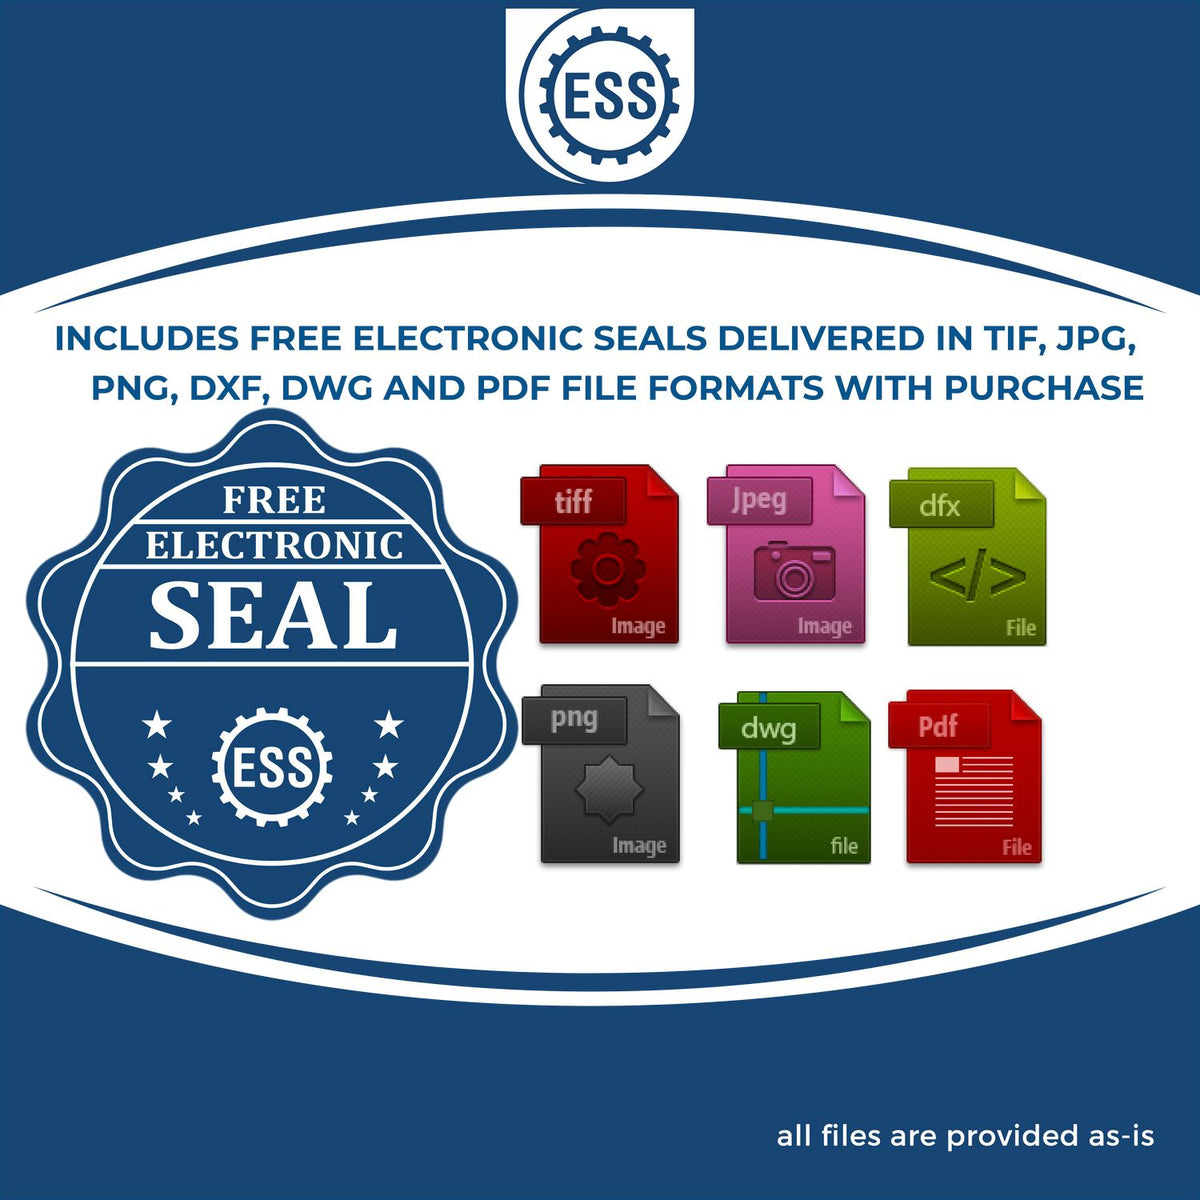 An infographic for the free electronic seal for the Gift Maryland Architect Seal illustrating the different file type icons such as DXF, DWG, TIF, JPG and PNG.